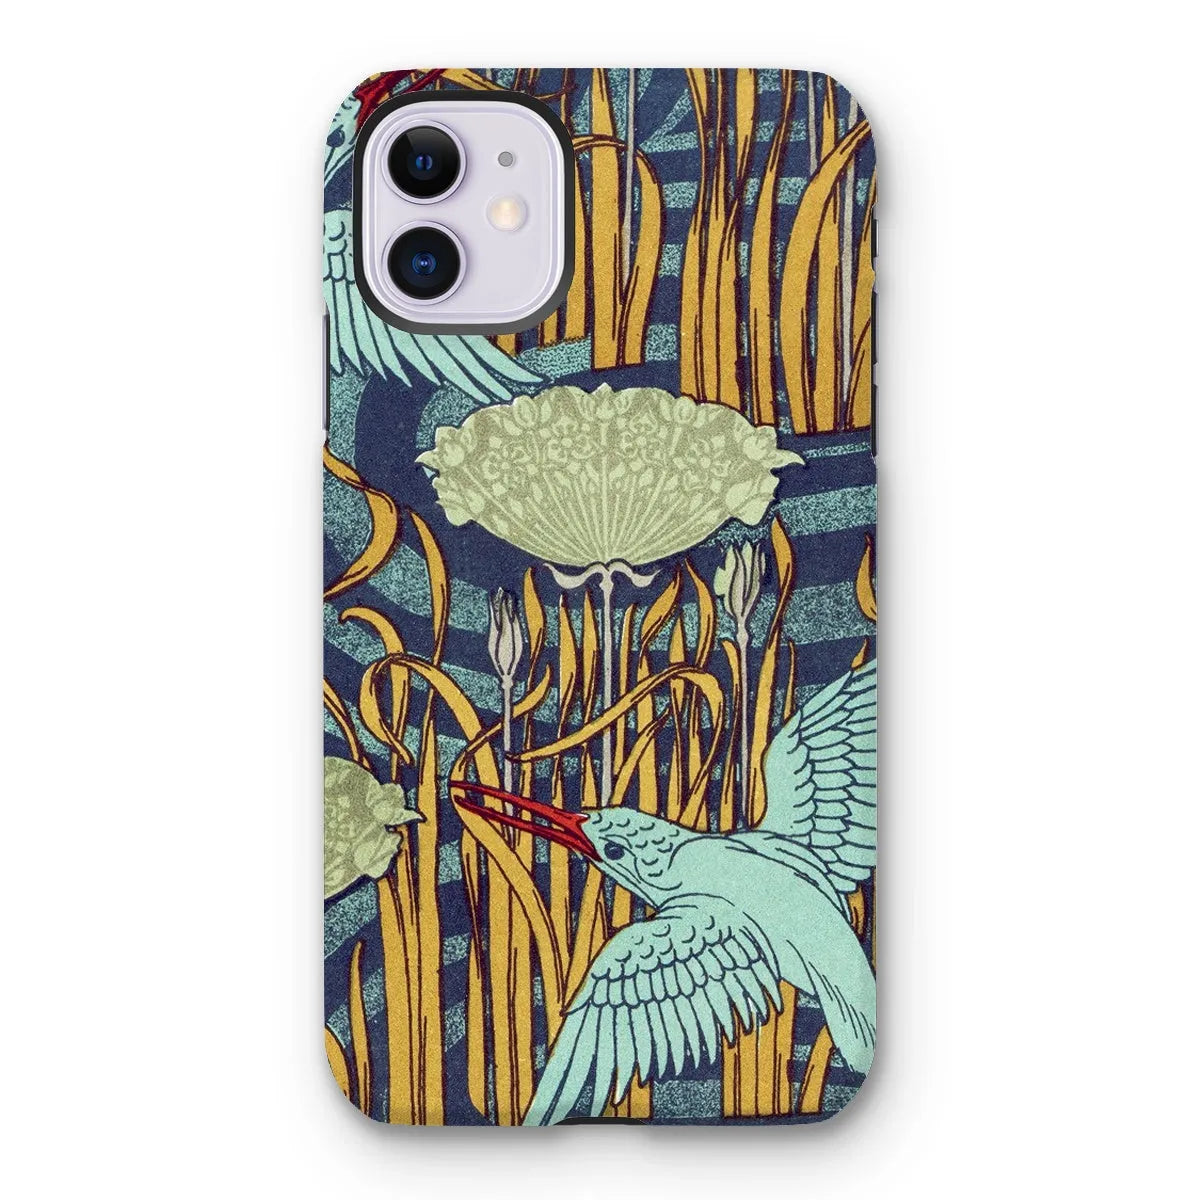 Kingfishers French Art Phone Case - Maurice Pillard Verneuil - Iphone 11 / Matte - Mobile Phone Cases - Aesthetic Art